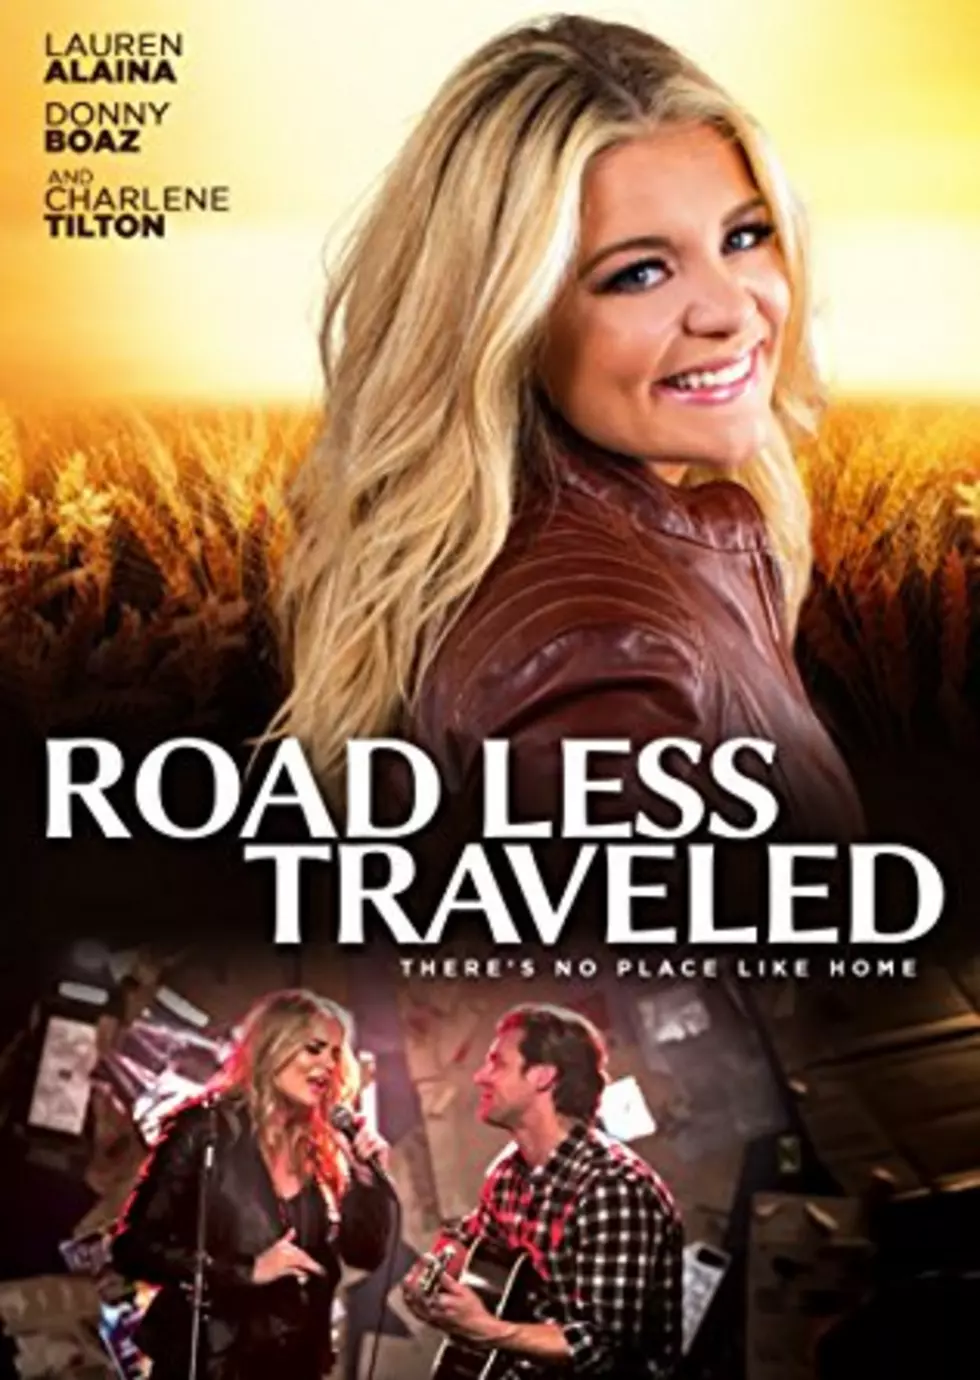 A Road Less Traveled DVD Website Giveaway